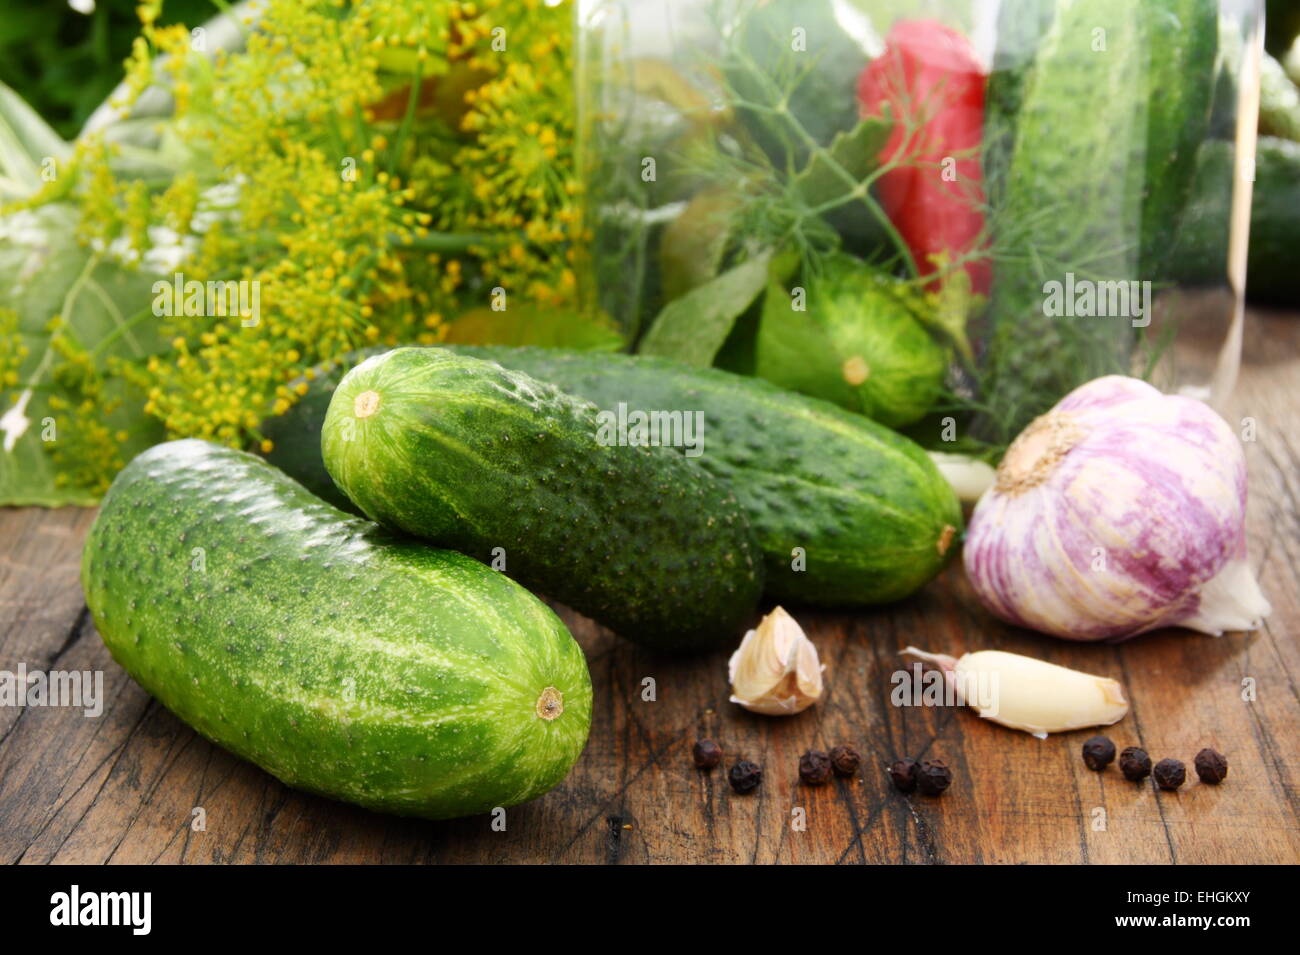 Cucumbers, herbs and spices for pickling. Stock Photo